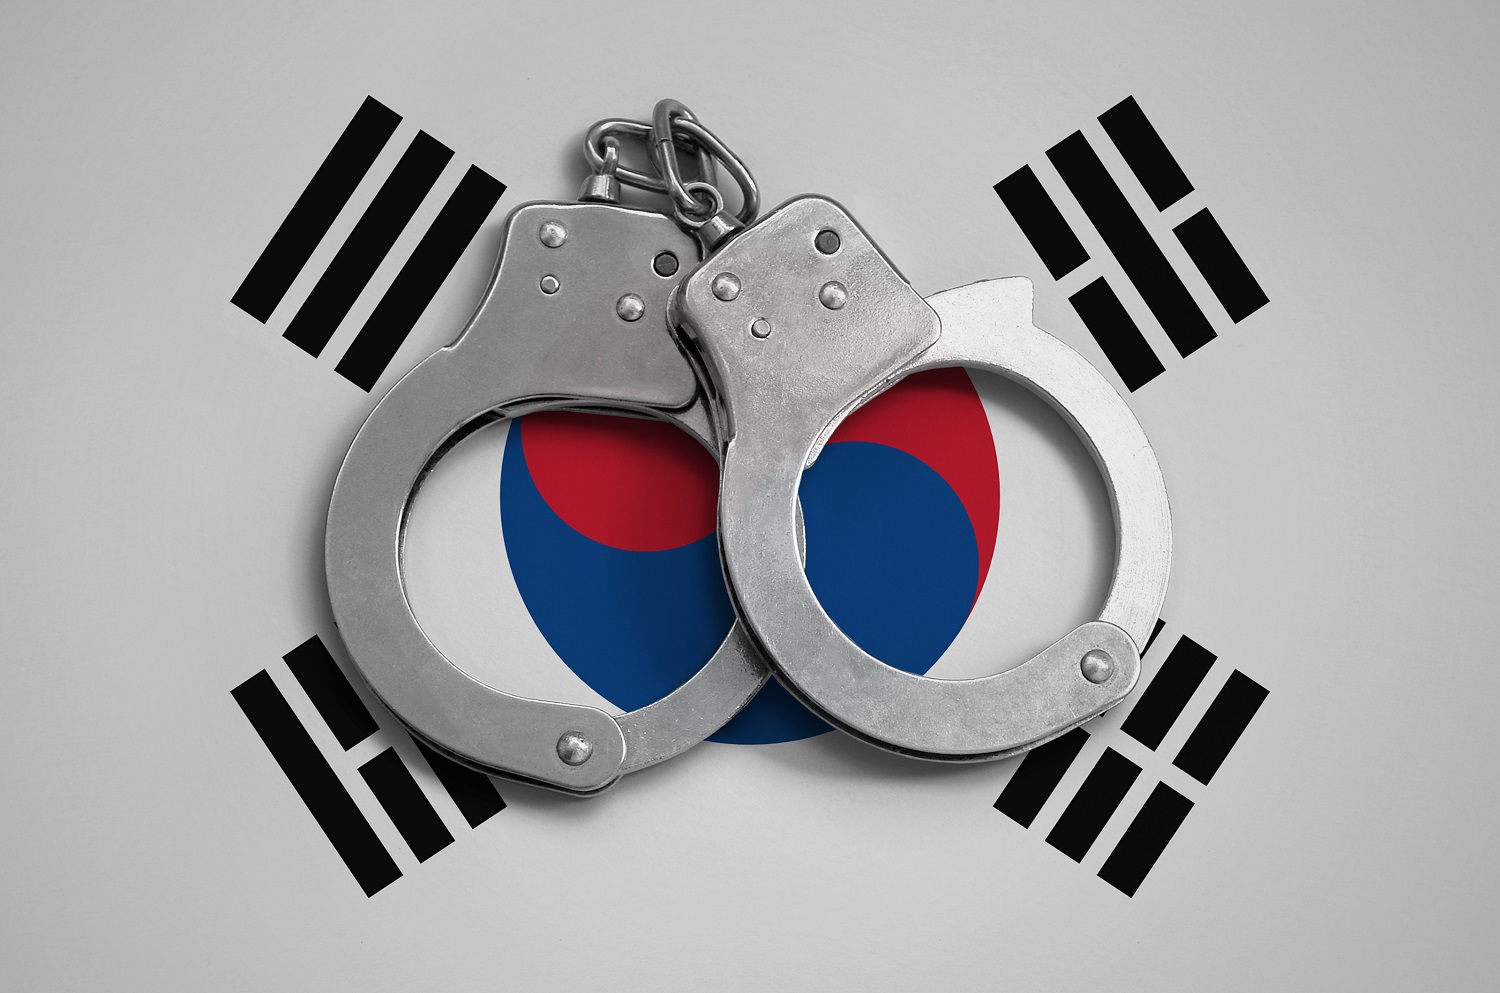 Crypto Debt Drove Korean Student to Armed Robbery